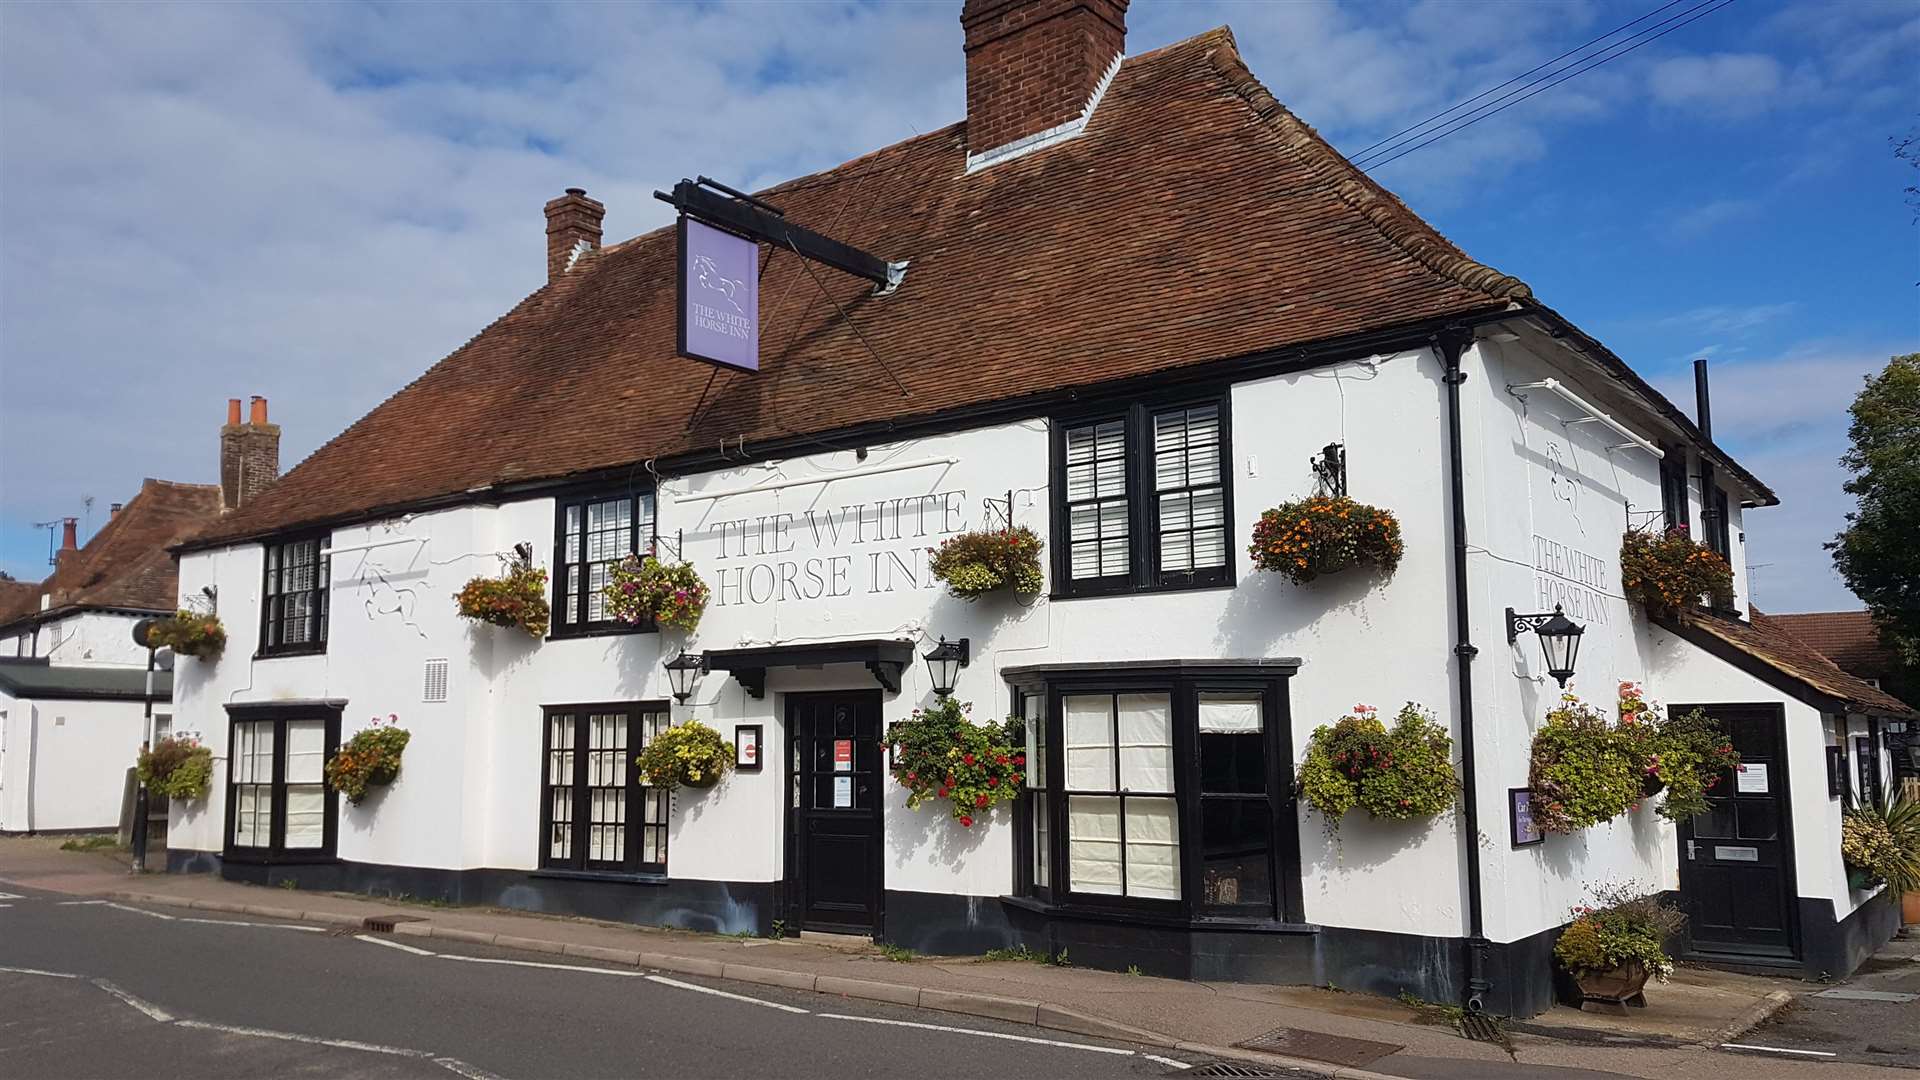 The search is on for a new tenant to take on The White Horse Inn in Bridge